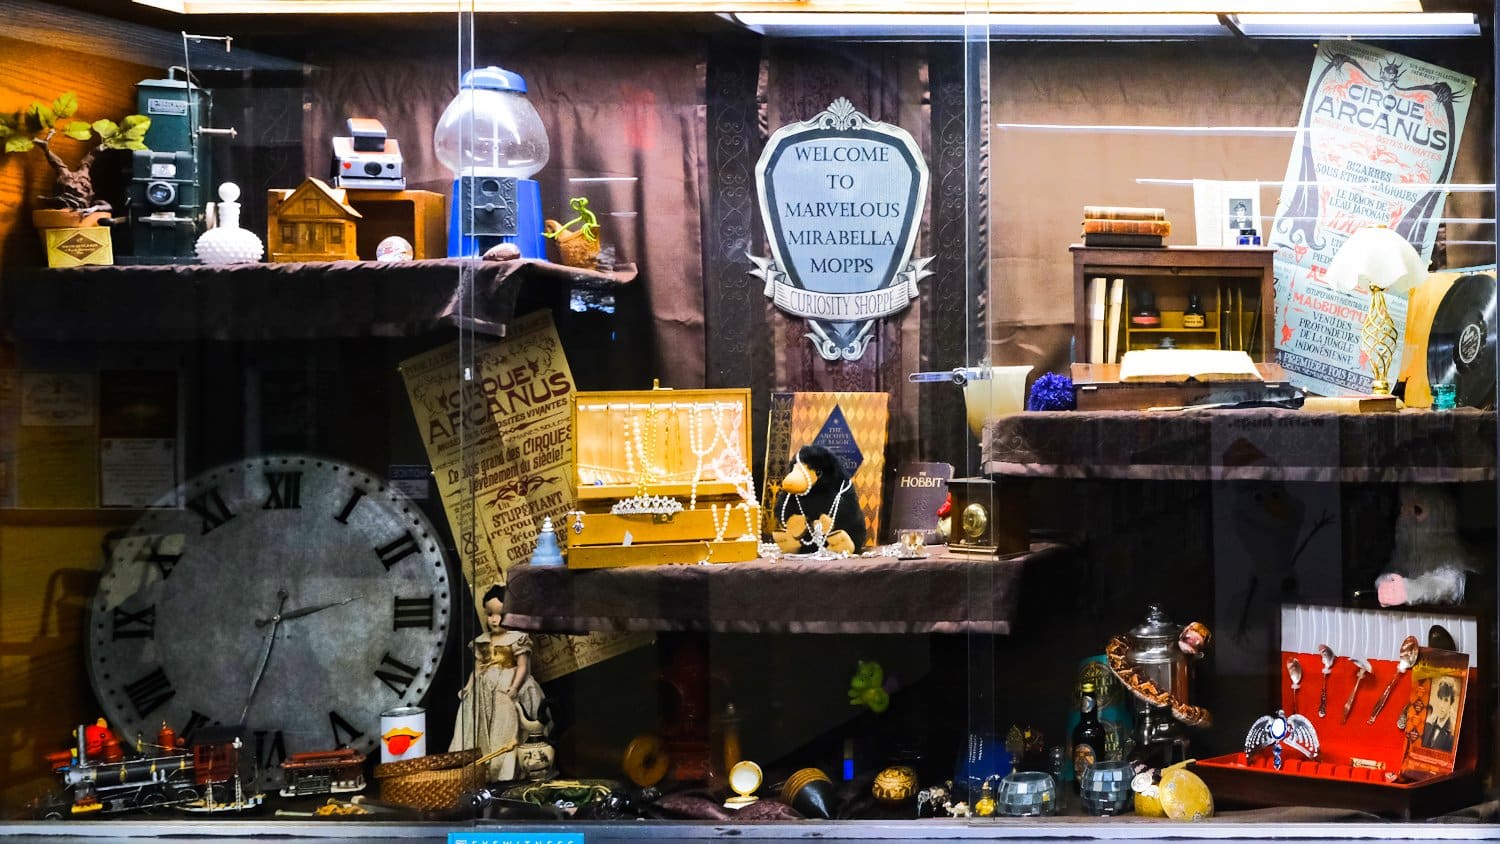 Fantastic Beasts-themed display in the youth section.